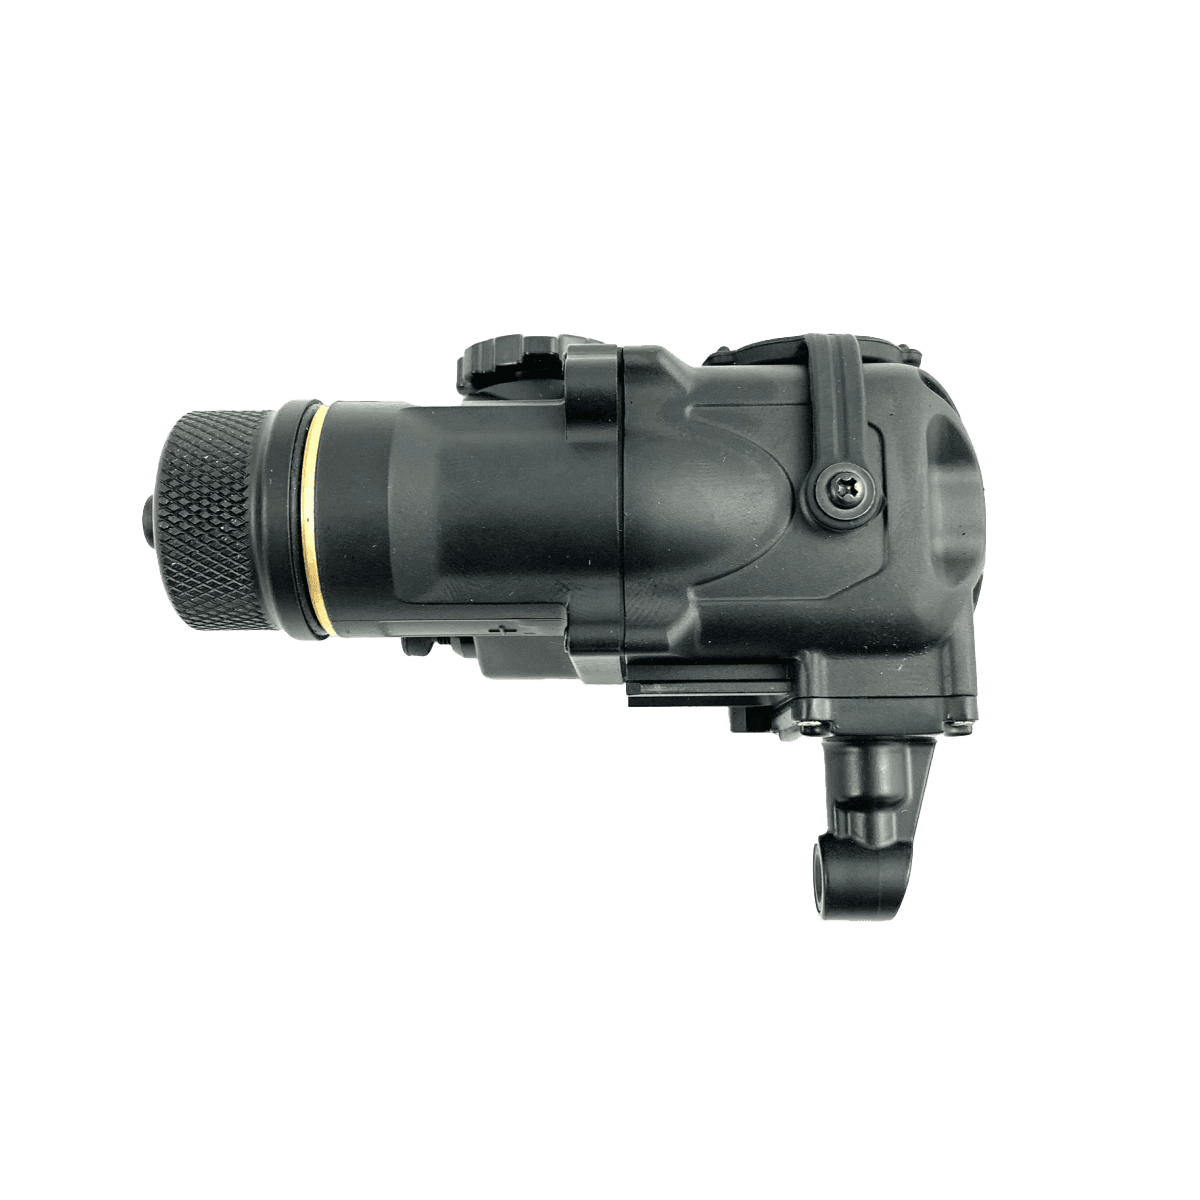 InfiRay Jerry C5 Clip On IR Thermal Fusion